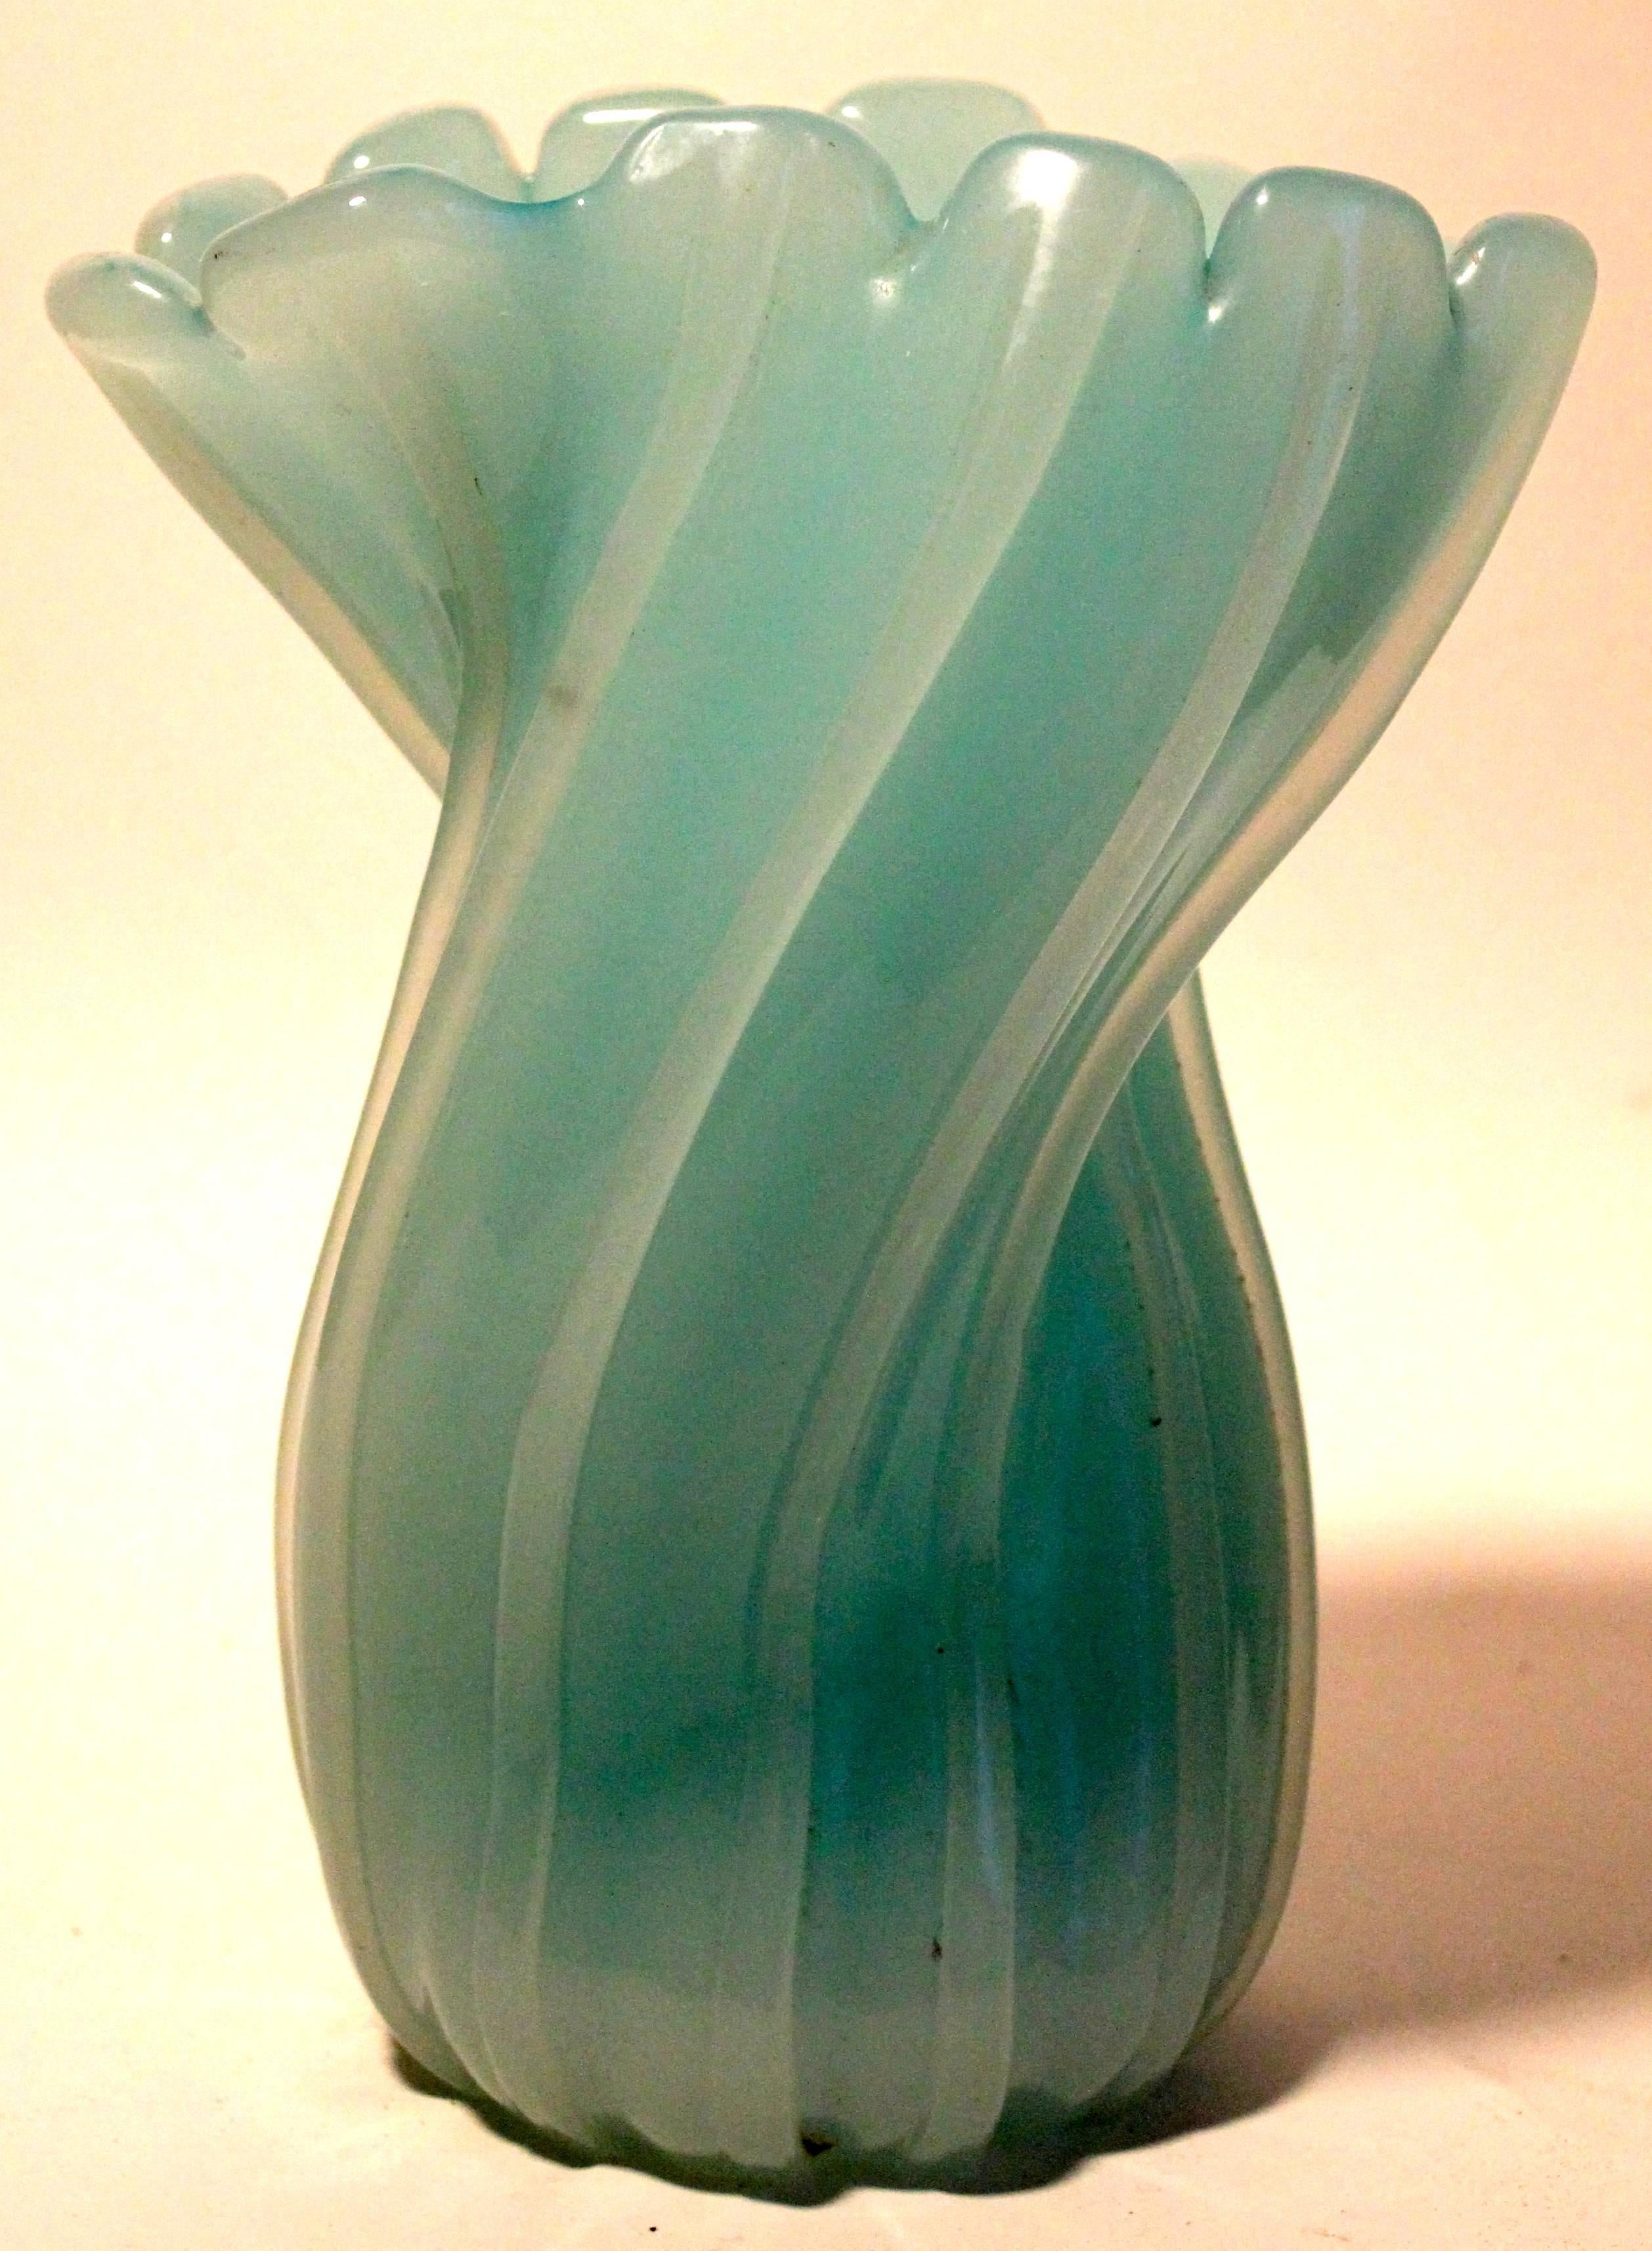 An Archimede Seguso twisted ribbed 'Ritorto a coste' vase in translucent light green glass with twisted ribbing. Reference: 